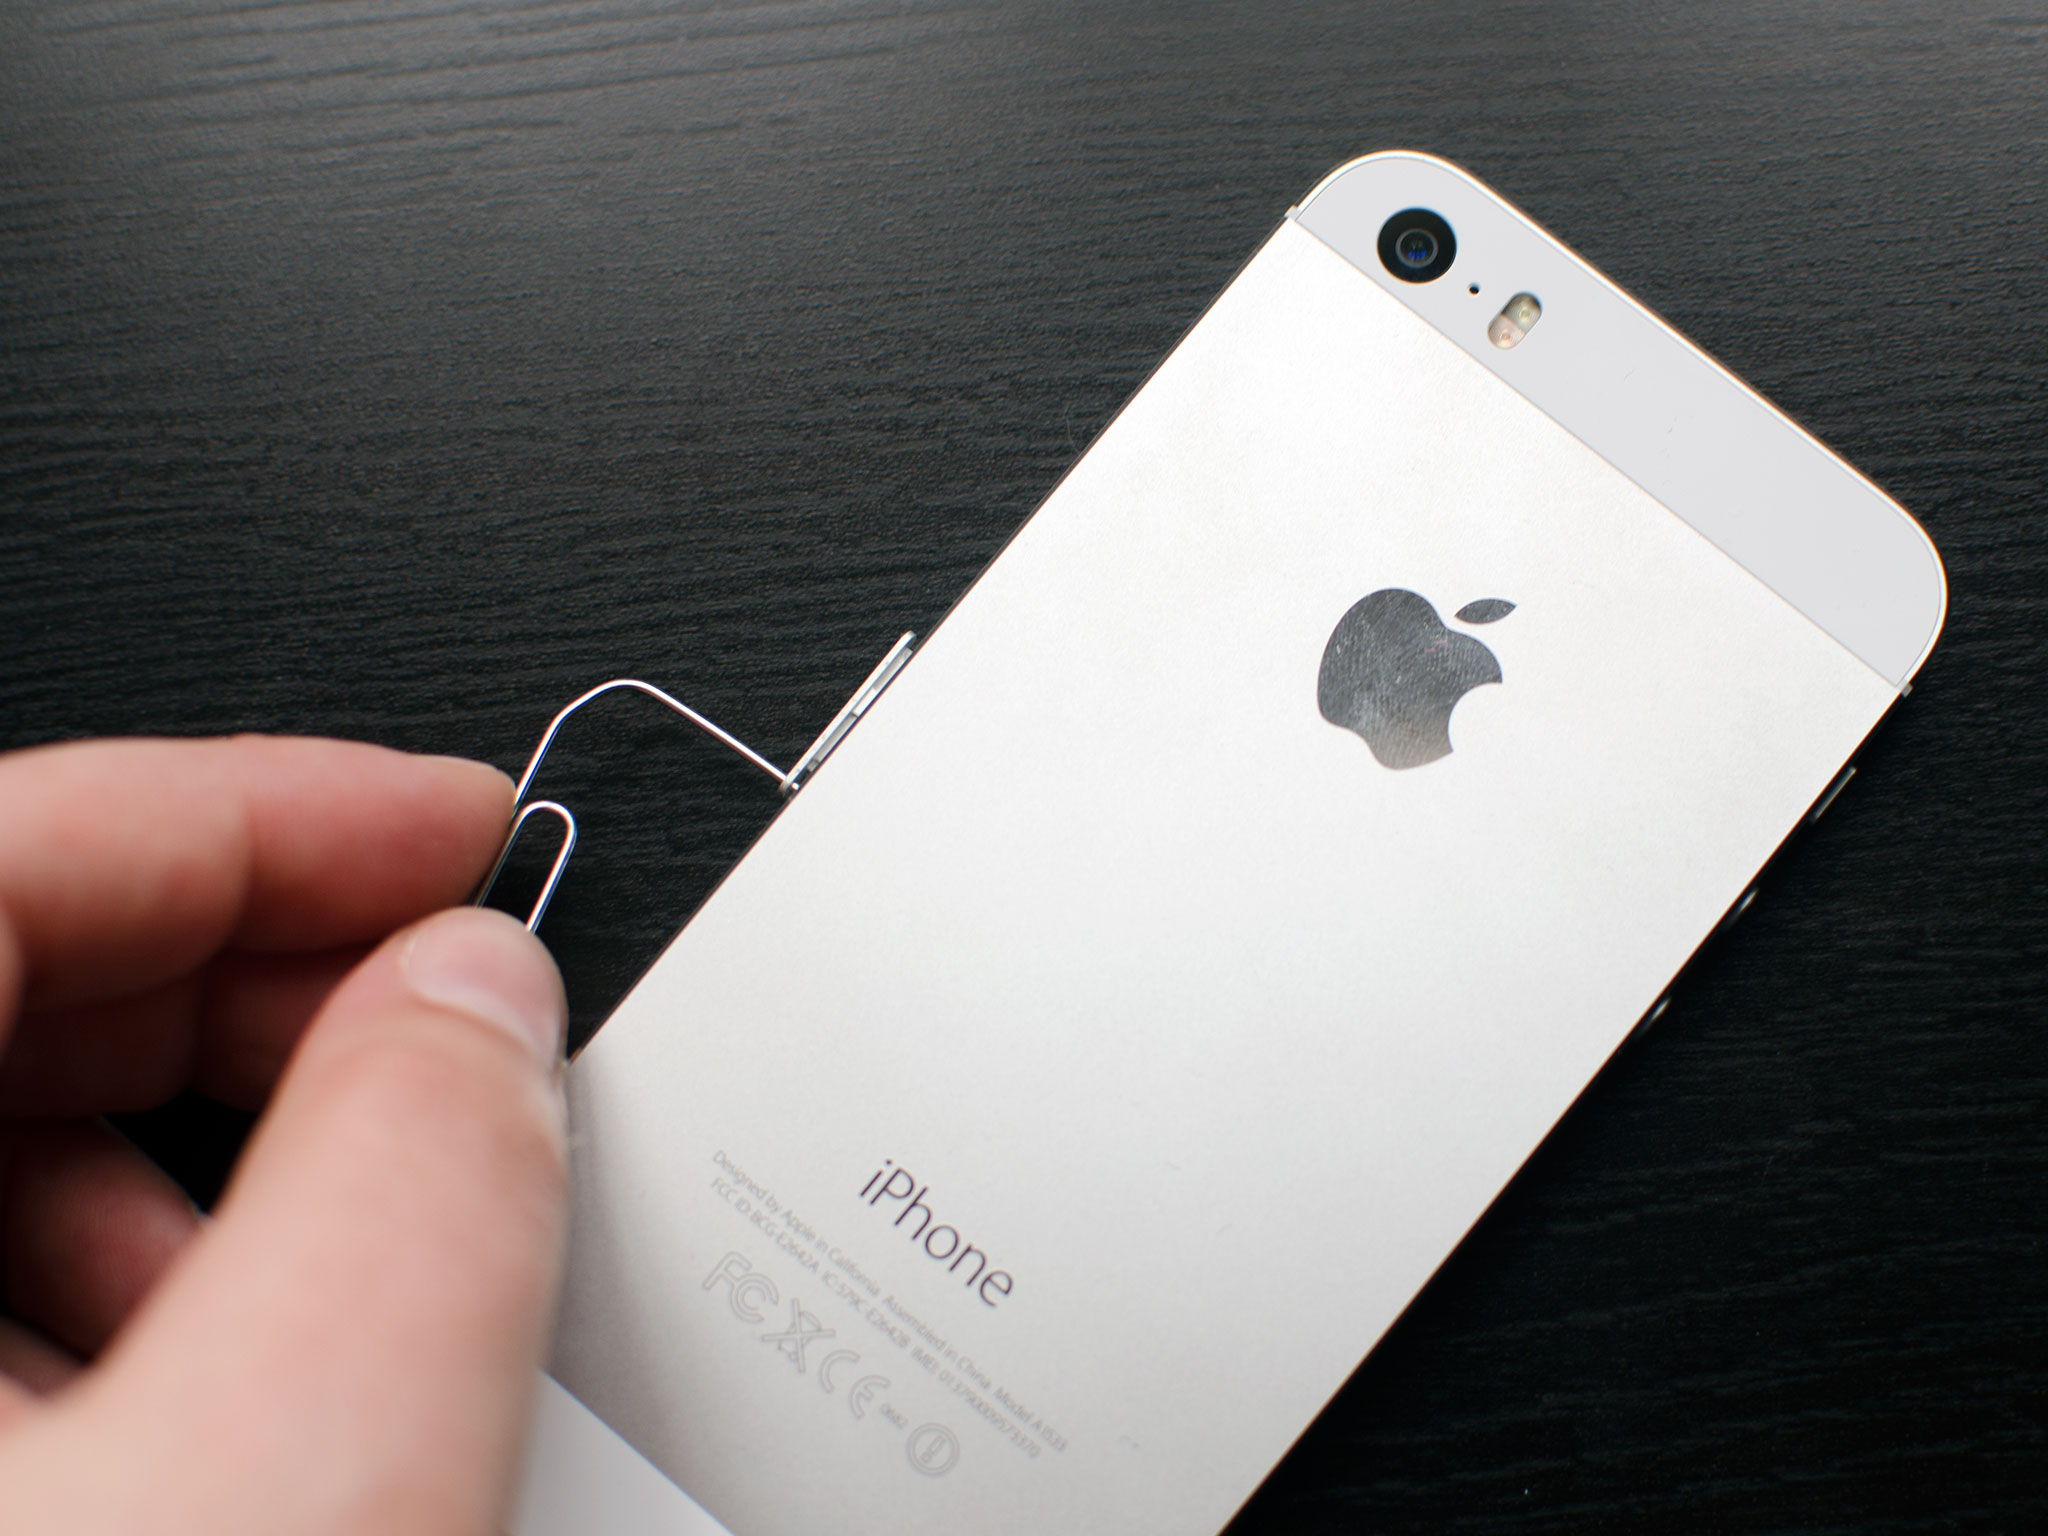 How to Remove the SIM card in an iPhone or iPad